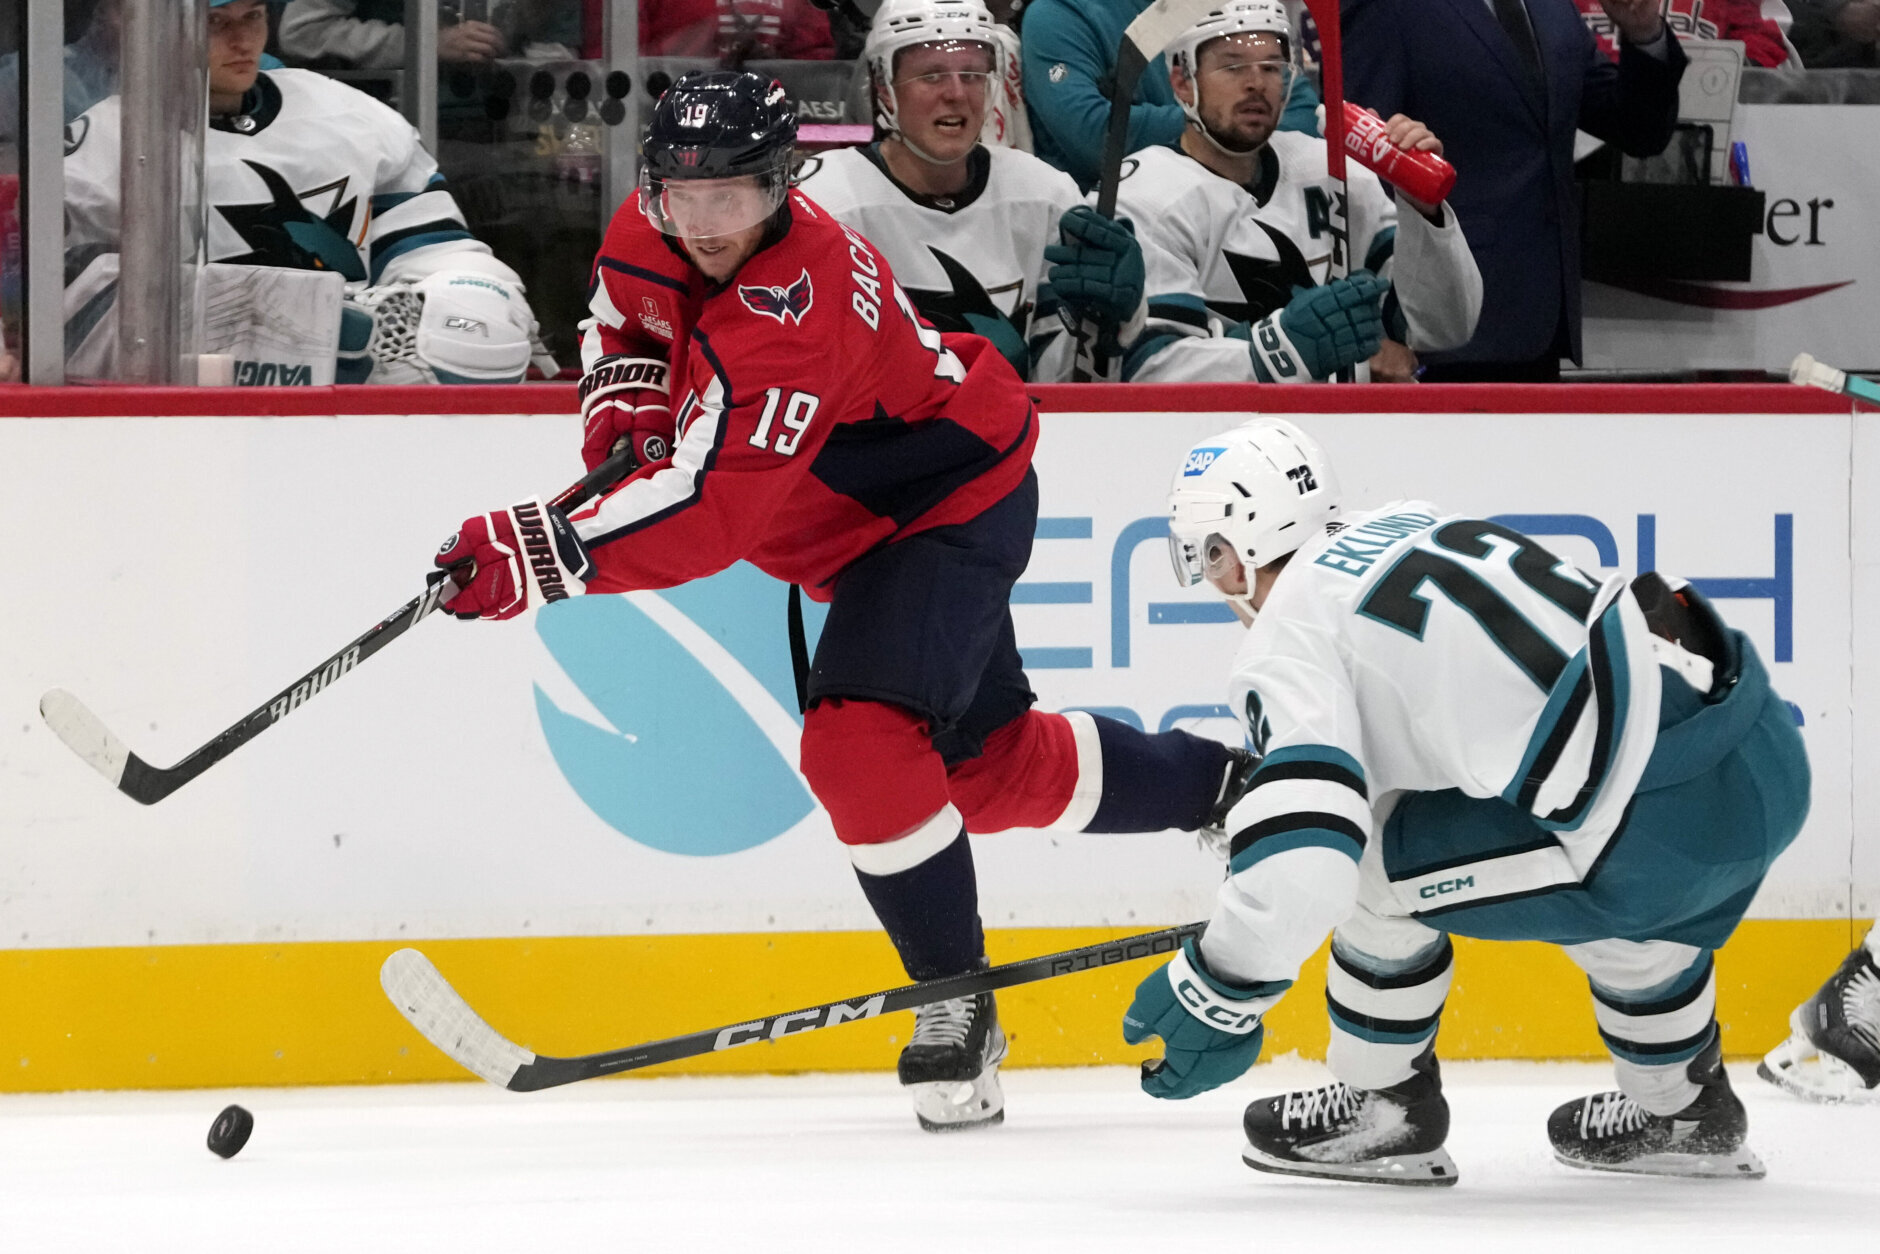 <h3>Nicklas Backstrom steps away from the Capitals</h3>
<p>Those in attendance for a late-October Sunday matinee against the San Jose Sharks had no way of knowing it at the time, but they likely saw the last game for a D.C. sports legend.</p>
<p>Days after Nicklas Backstrom skated a modest 12:24 against the Sharks, the 17-year veteran said <a href="https://wtop.com/washington-capitals/2023/11/nicklas-backstrom-to-step-away-from-capitals-due-to-ongoing-health-issues/" target="_blank" rel="noopener">he was stepping away from the game</a>. While not an official retirement announcement, <a href="https://wtop.com/washington-capitals/2023/11/nicklas-backstrom-is-unlikely-to-play-again-this-season-capitals-gm-brian-maclellan-says/" target="_blank" rel="noopener">few expect Backstrom to return</a> from the chronic hip issues that led to the difficult decision.</p>
<p>If this is the end for the Capitals’ No. 2 all-time scoring leader and a key cog on the 2018 Cup champs, he left with little fanfare given the abrupt nature of his departure. There was no farewell tour or ‘Nicklas Backstrom Appreciation Night.’ But that’s perhaps fitting for a player who spent so much of his career playing in Alex Ovechkin’s shadow and was just fine staying out of the spotlight.</p>
<p>Backstrom will eventually be celebrated with a jersey retirement and potential Hall of Fame induction. For now, his departure is another reminder that for the Capitals’ aging core, the finish line to legendary careers is approaching.</p>
<p><em>— Ben Raby</em></p>
